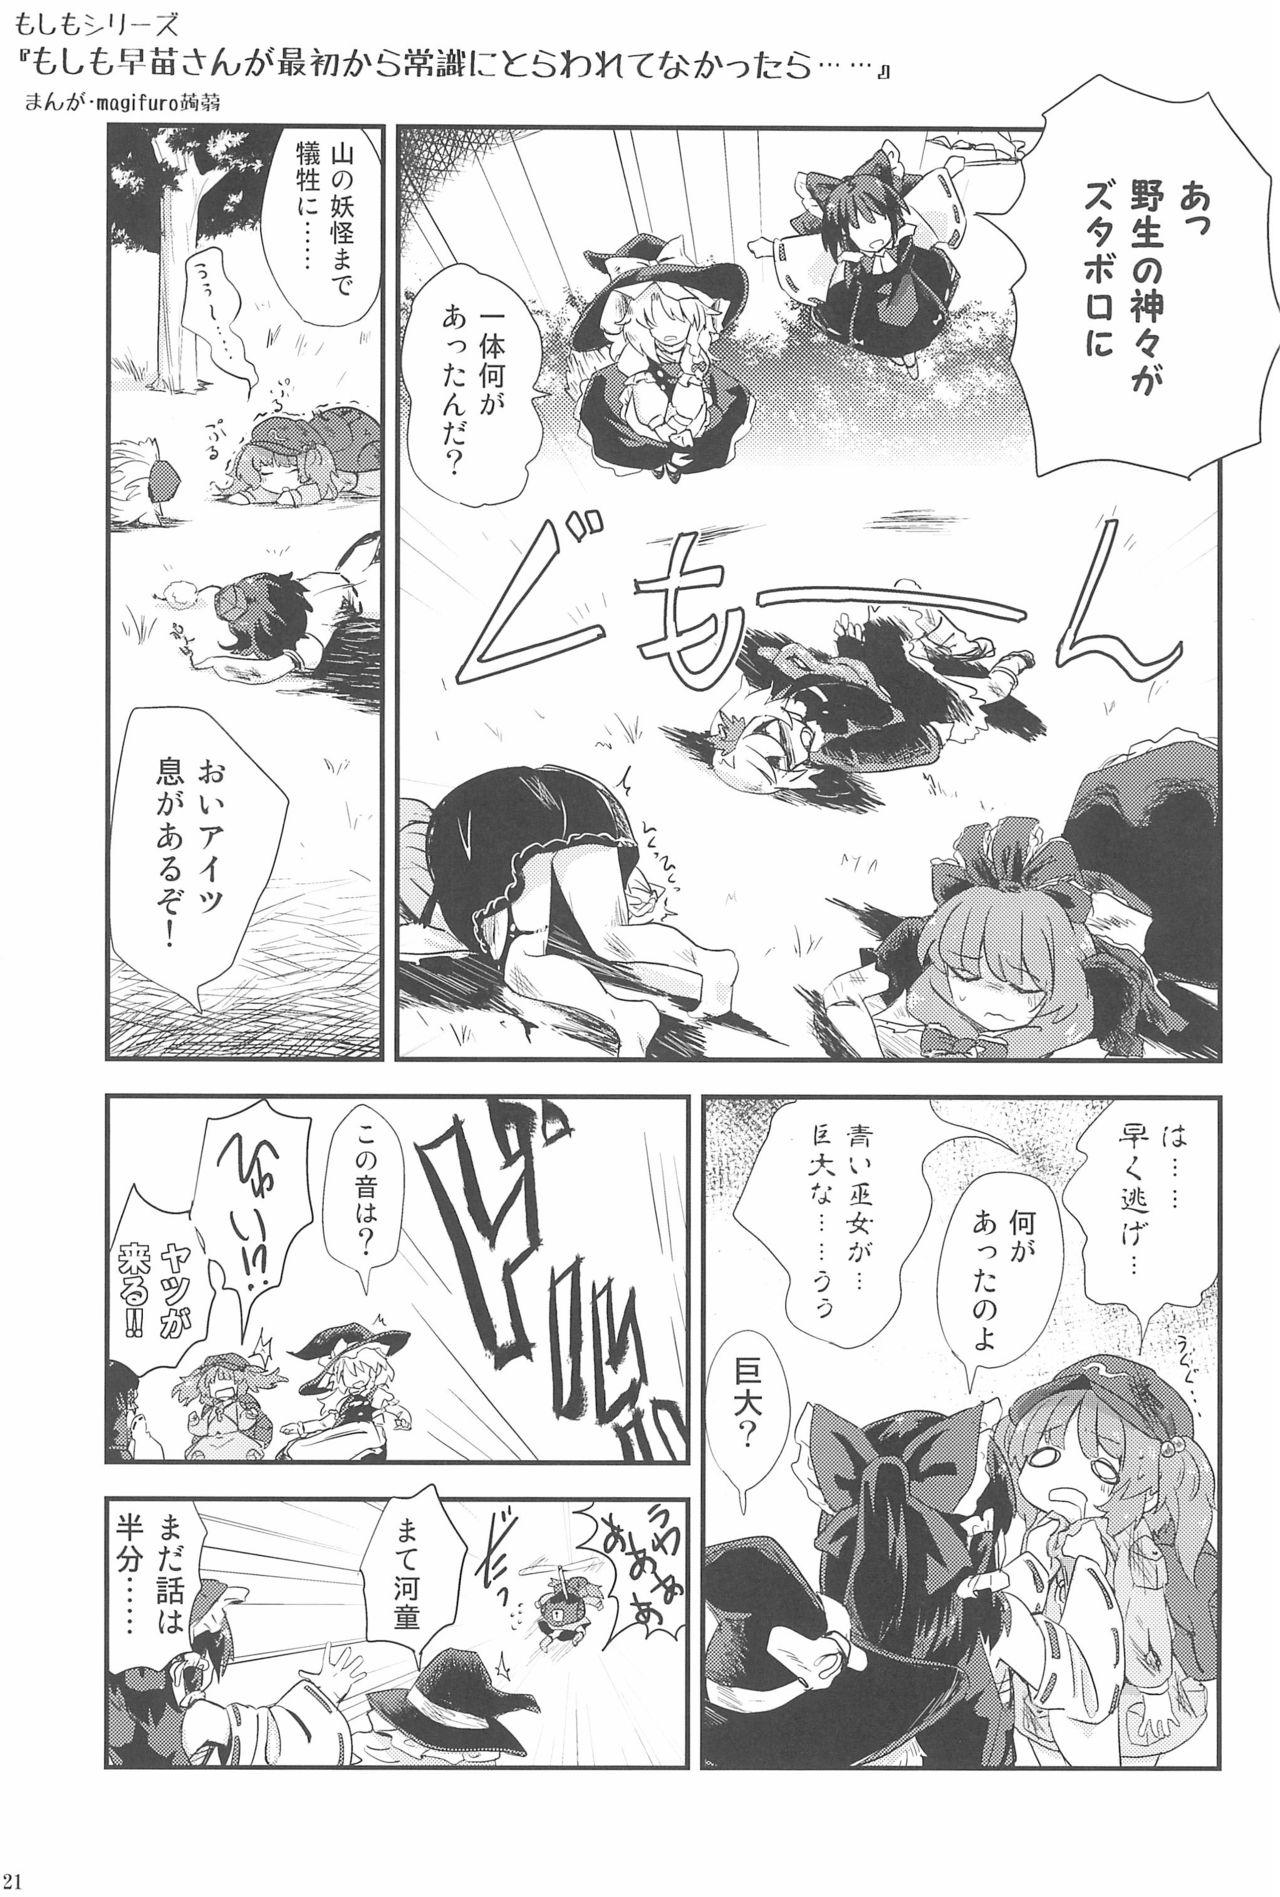 Touhou Roadkill Joint Publication 20